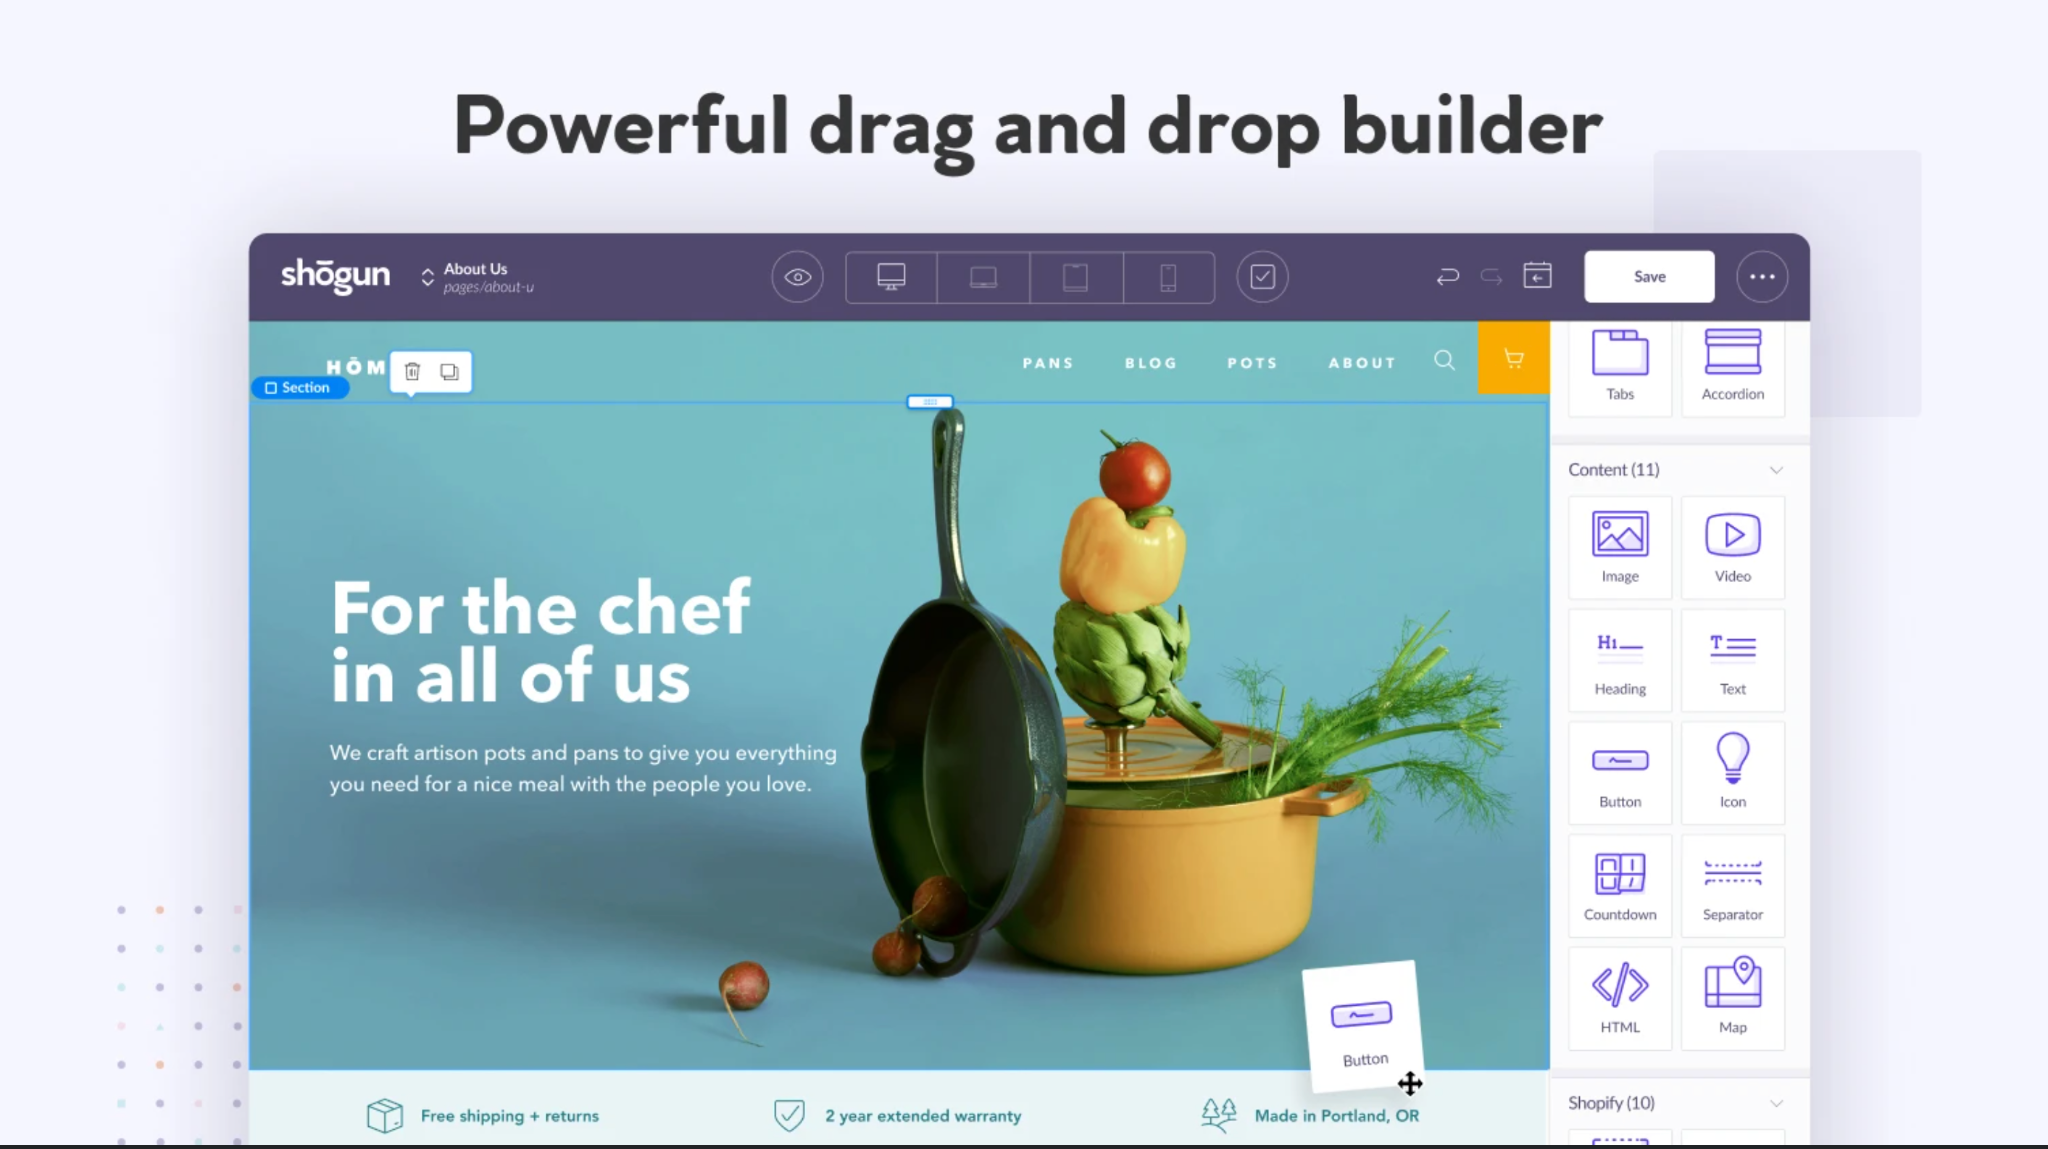 shogun page builder drag and drop builder for shopify